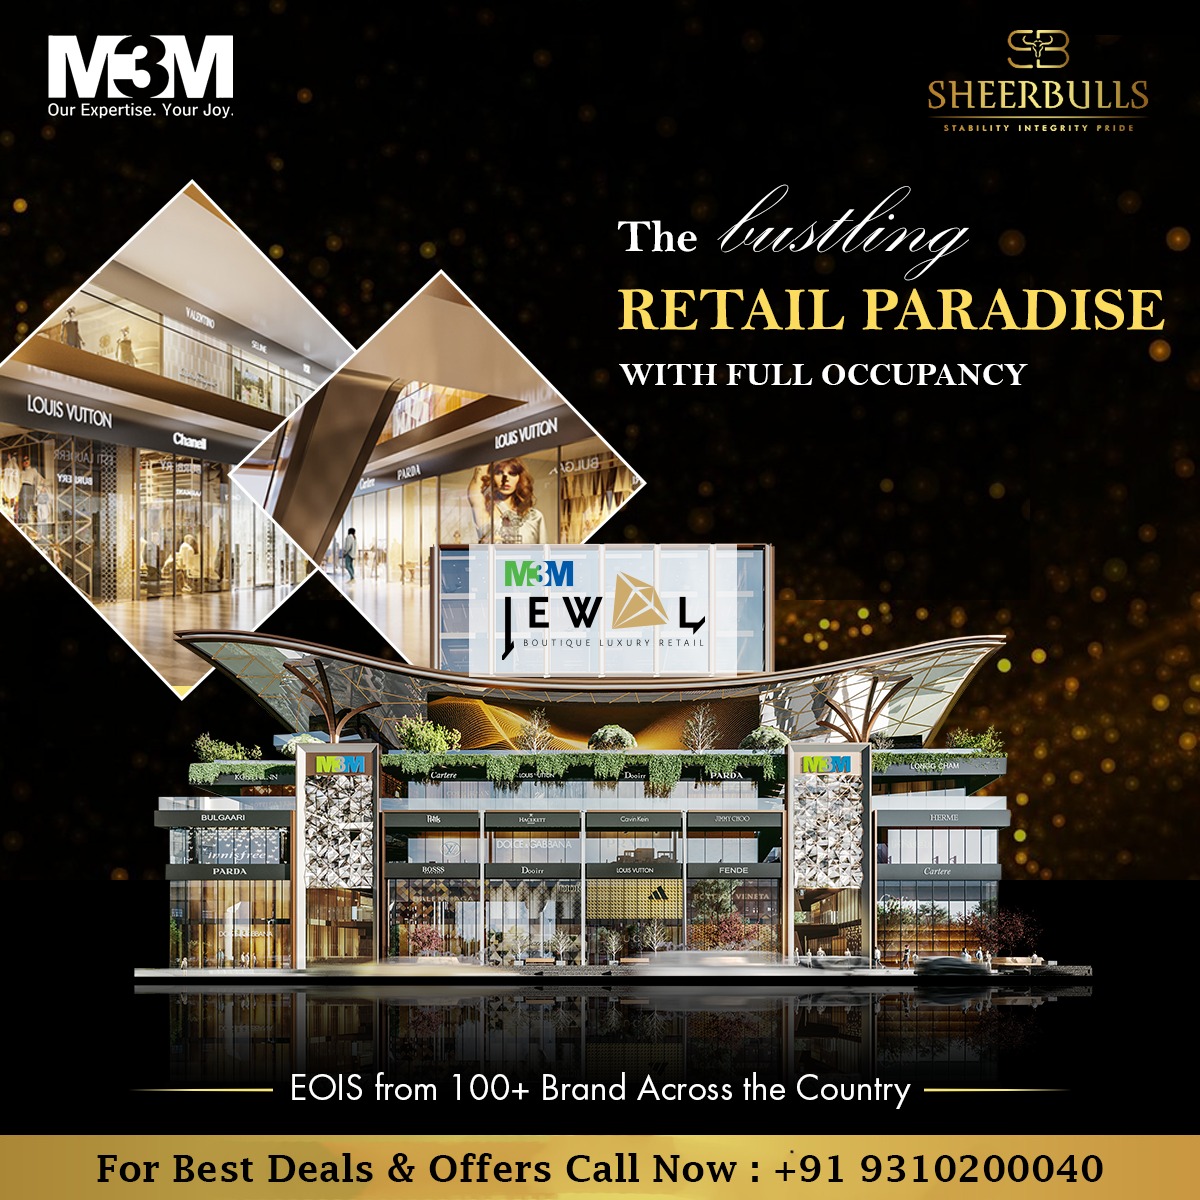 Invest in M3M Jewel on MG Road for prime location, luxury living, and lucrative rental returns! 💎🏙️ Invest smart, live lavishly, and earn effortlessly!

#sheerbullsindia #M3MJewel #investmentopportunity